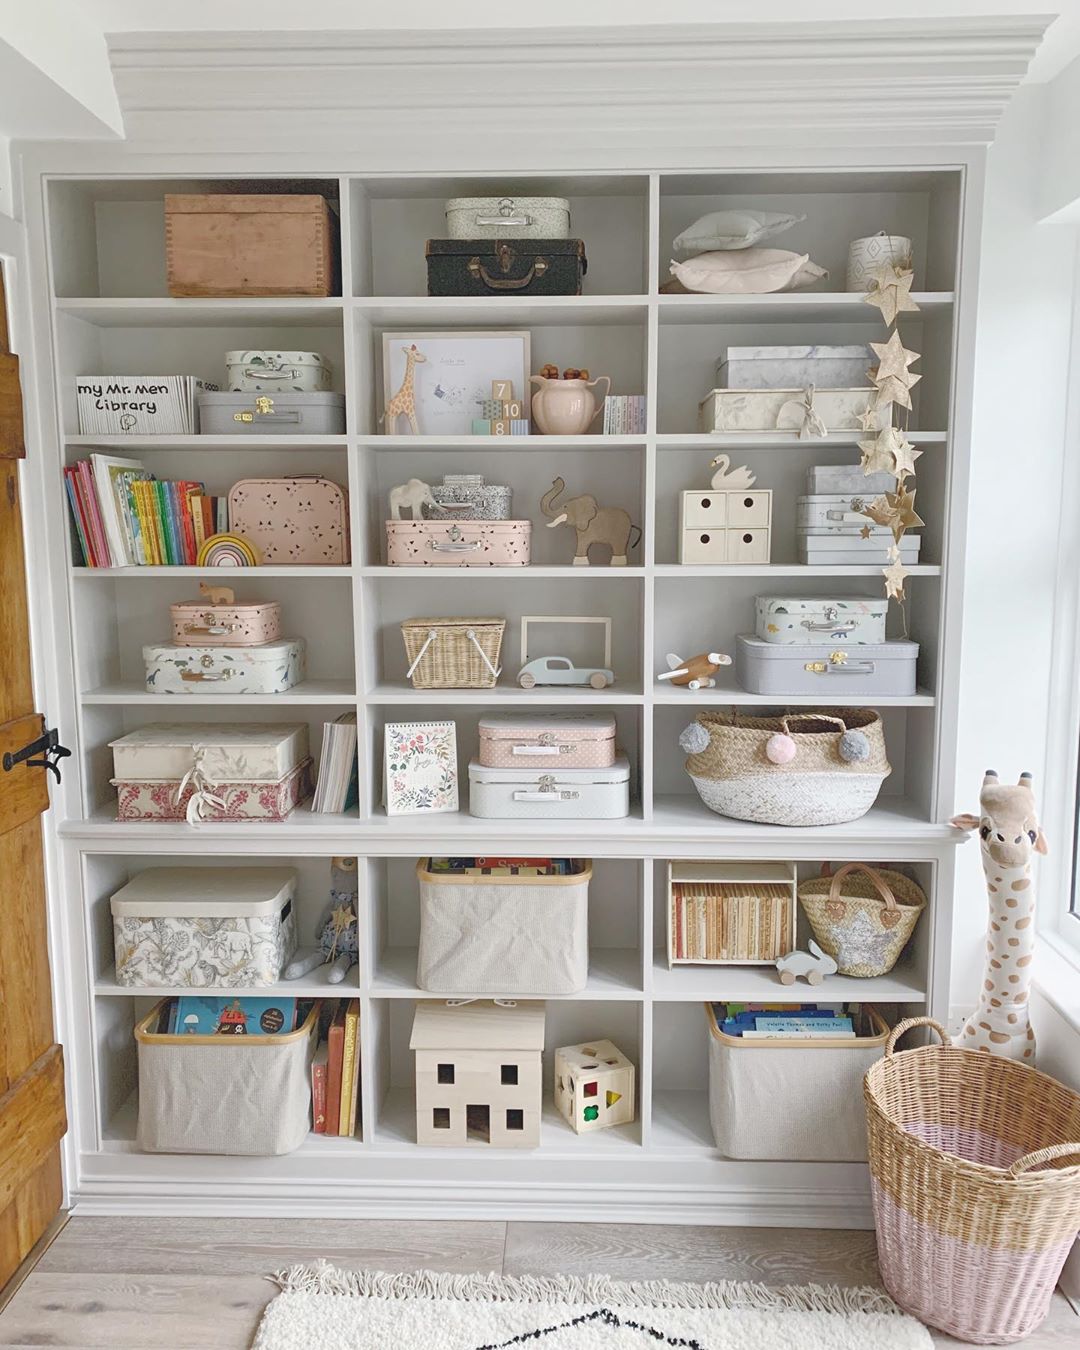 storage wall with individual cubby holes photo by Instagram user @wallflower_cottage